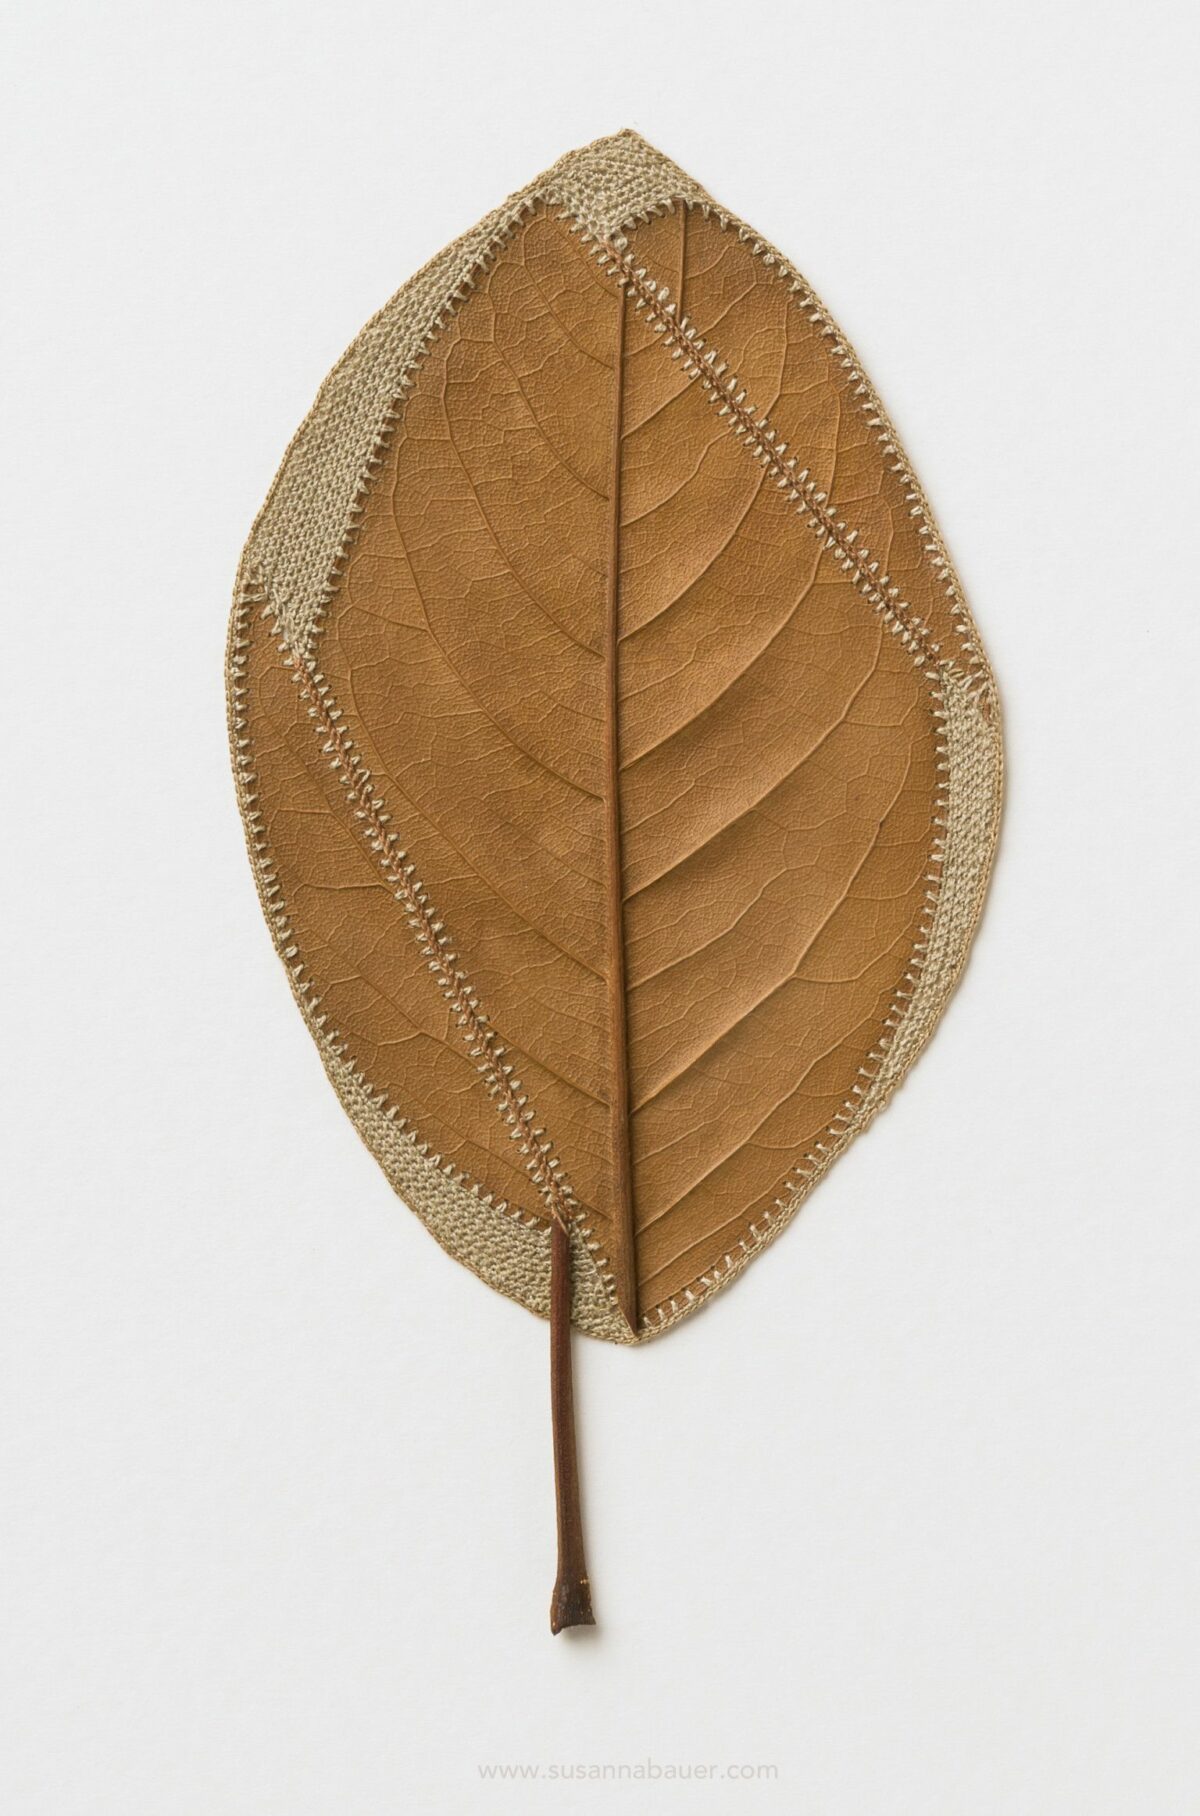 Beautiful Sculptures Of Dried Leaves Crocheted Delicate Patterns By Susanna Bauer 26